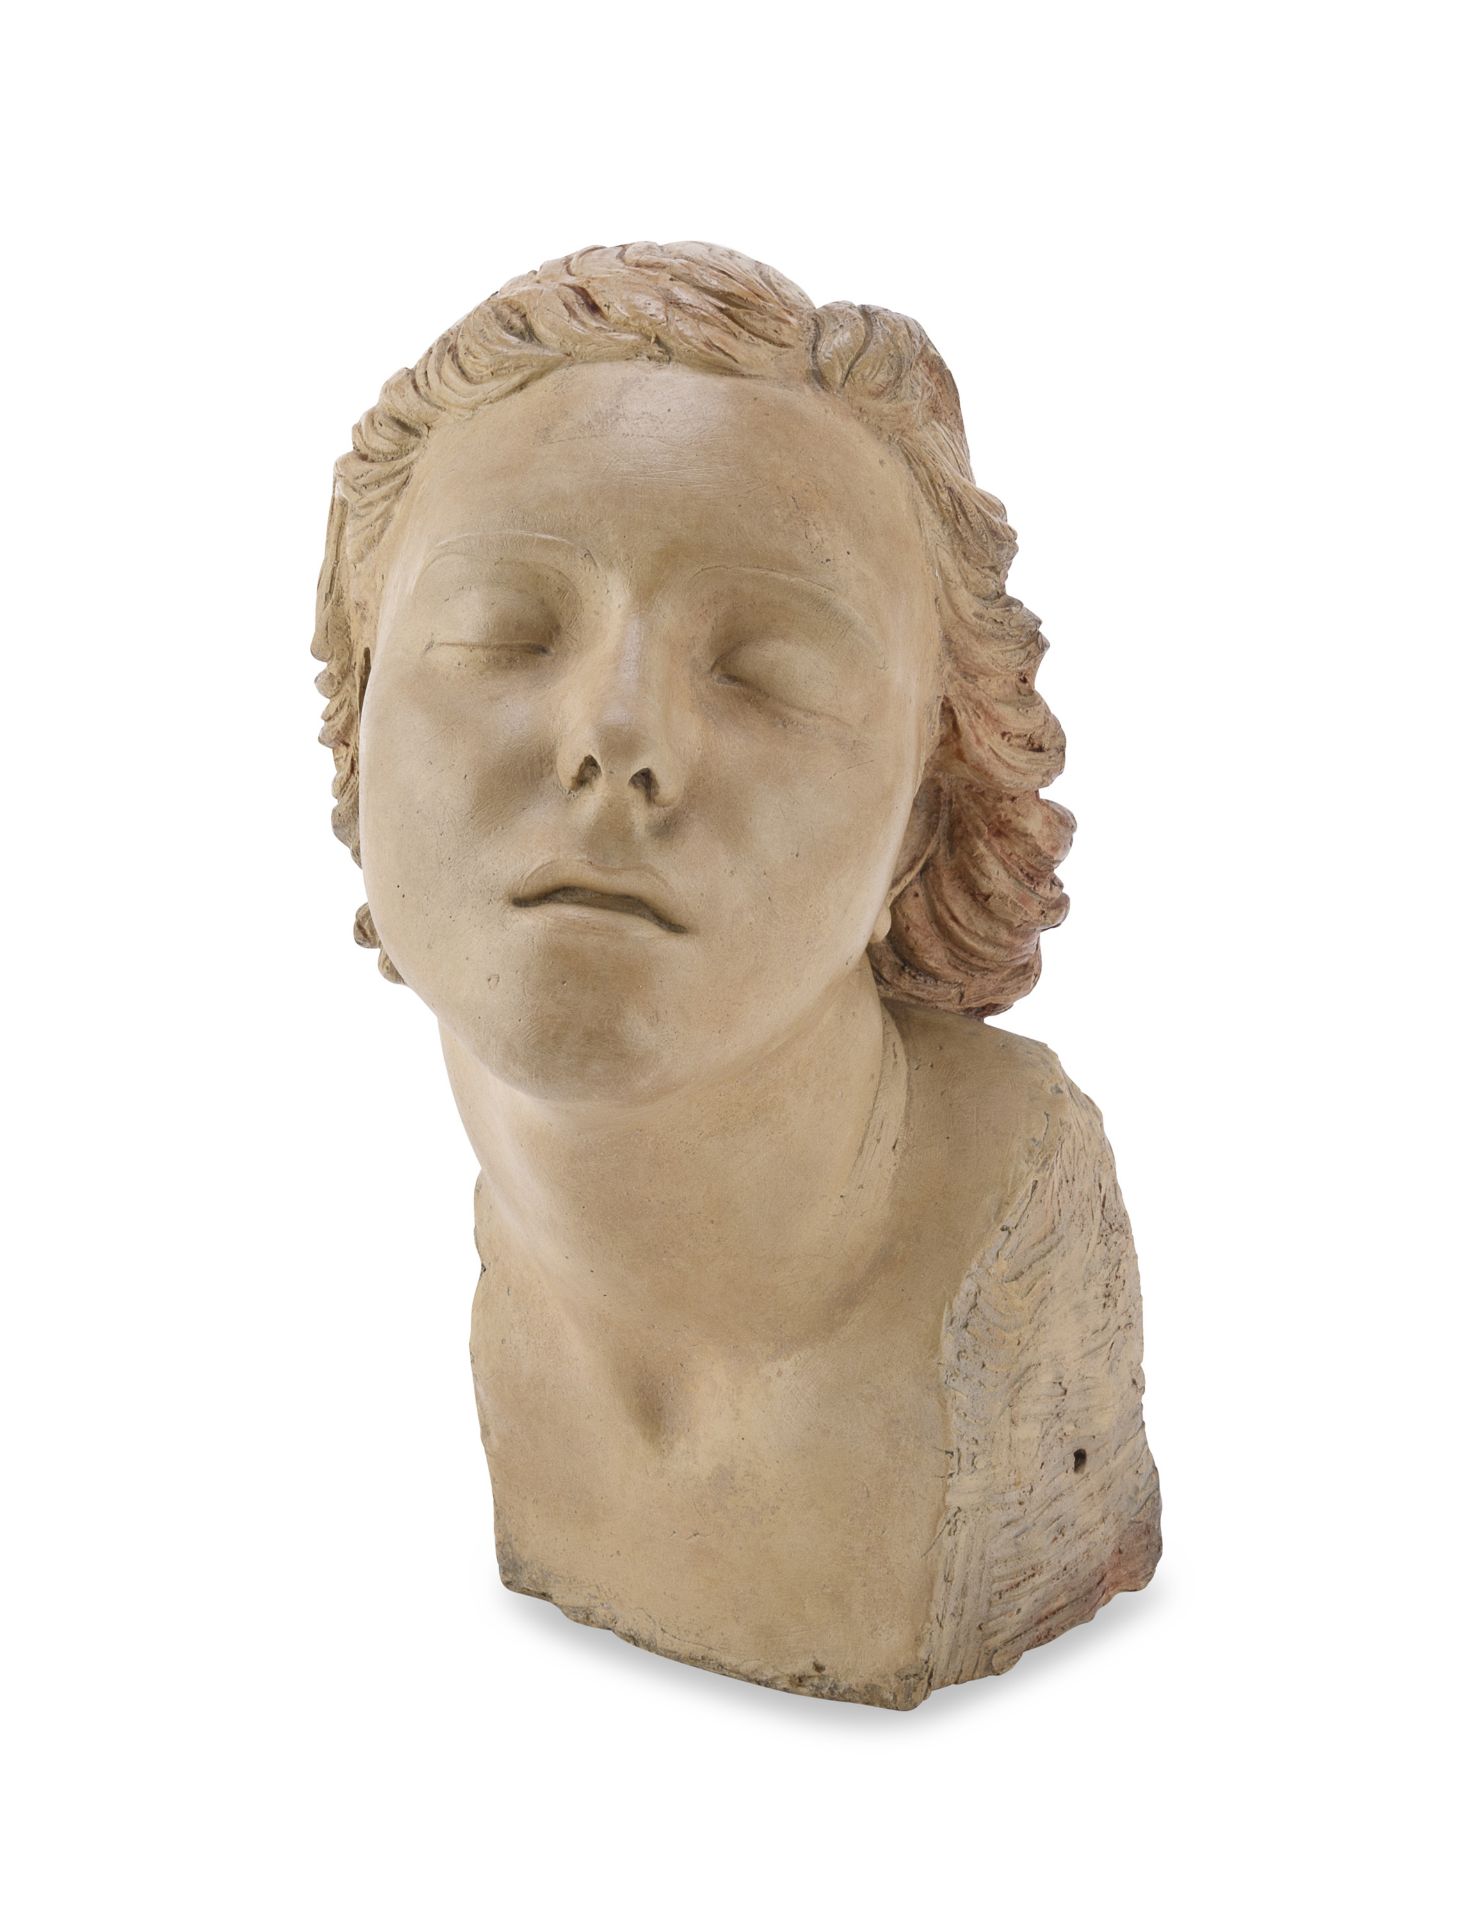 TERRACOTTA BUST OF A WOMAN IN BY ATTILIO TORRESINI 1929